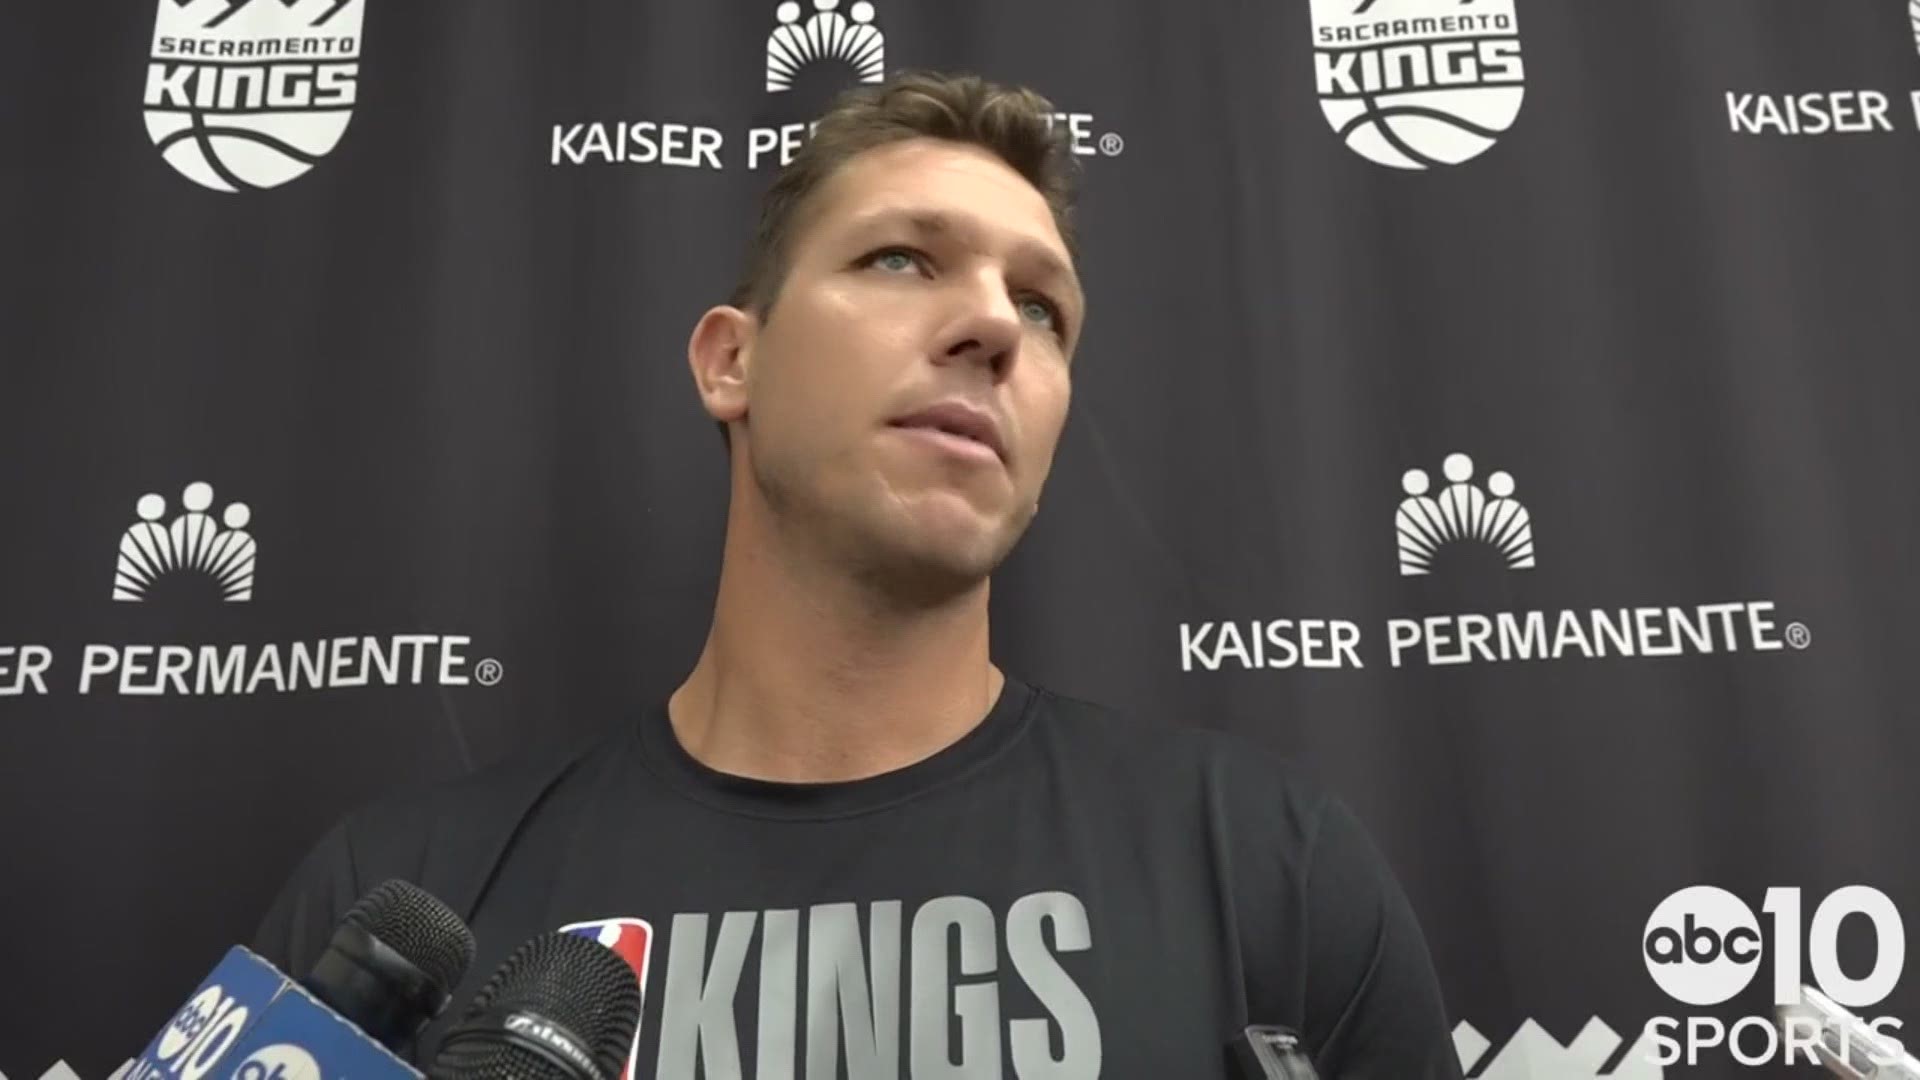 Coach Luke Walton describes the final practice before the Kings depart Sacramento for India later that night, and why not having WiFi on the flight is a good thing.